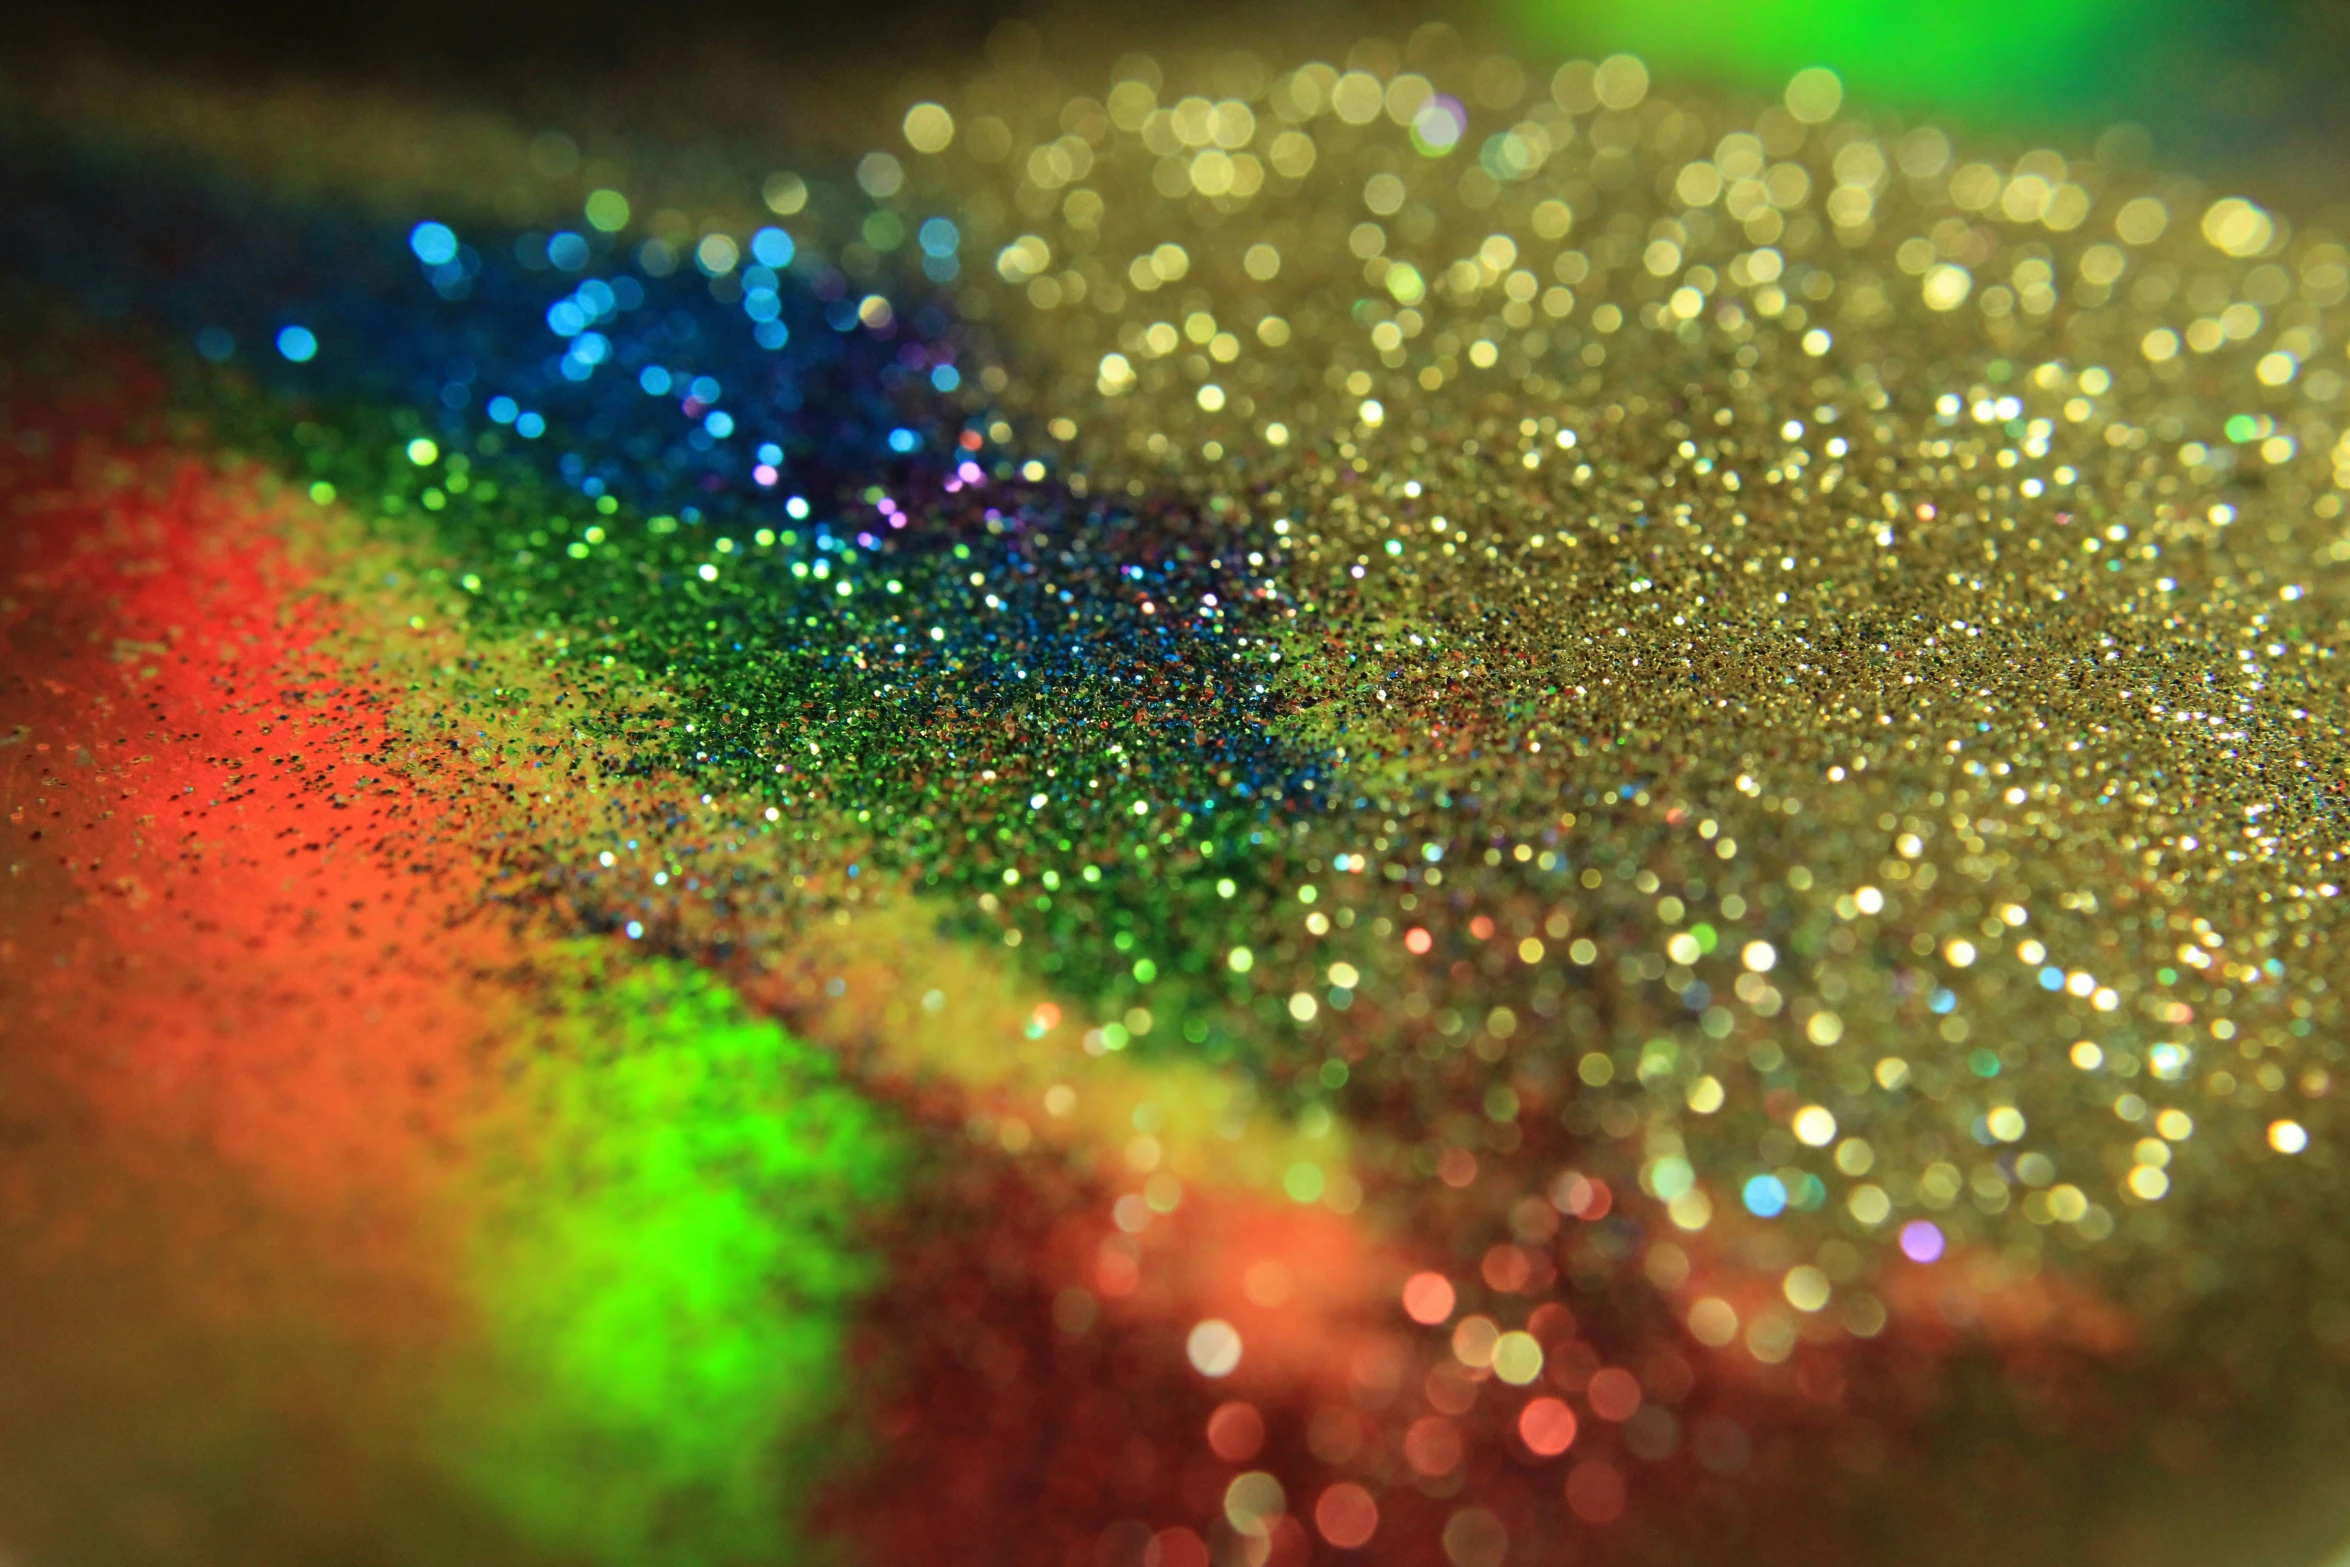 the color of this image reflects a glitter texture